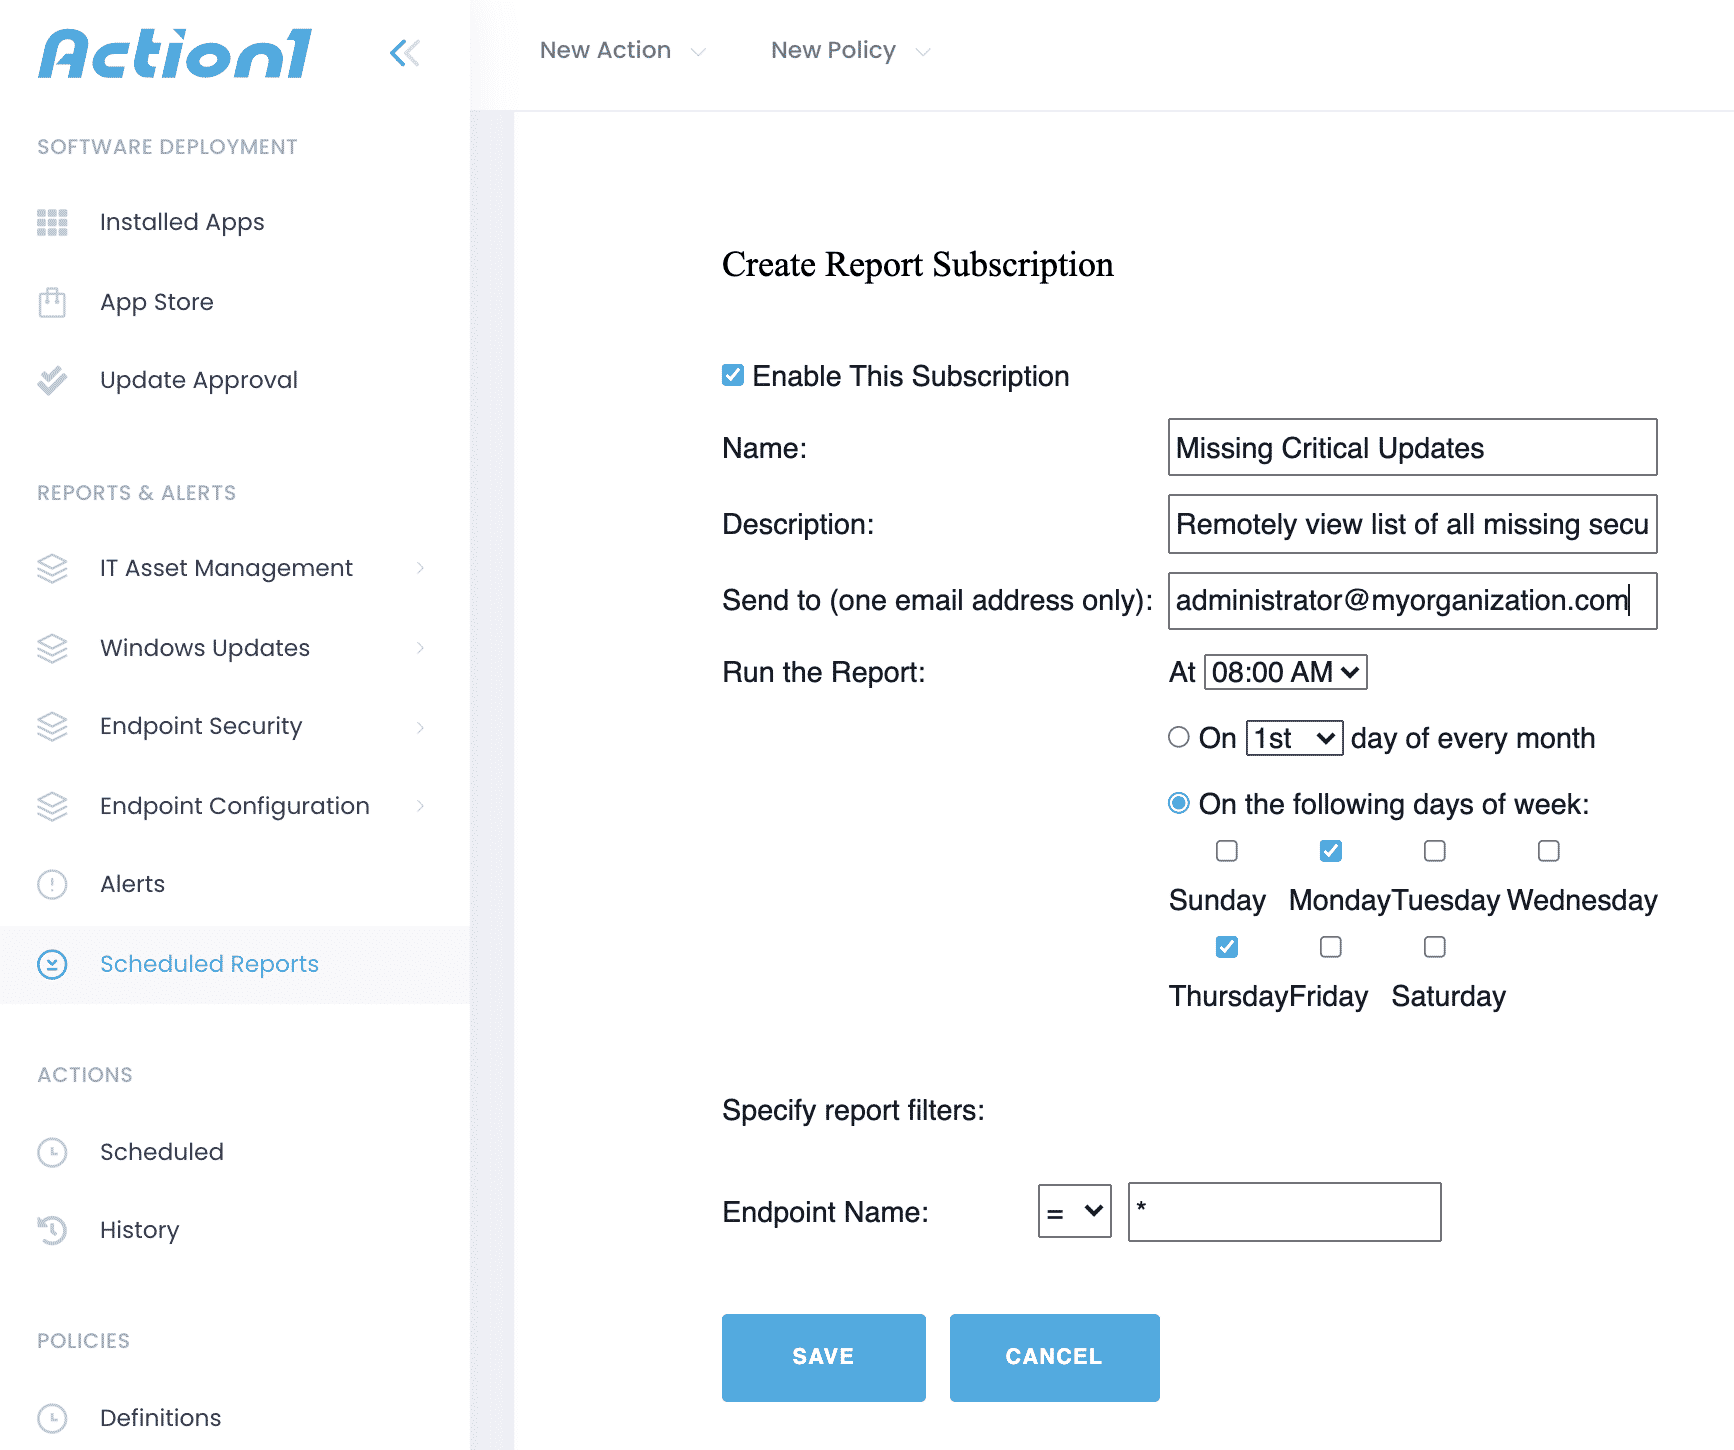 Creating a report subscription